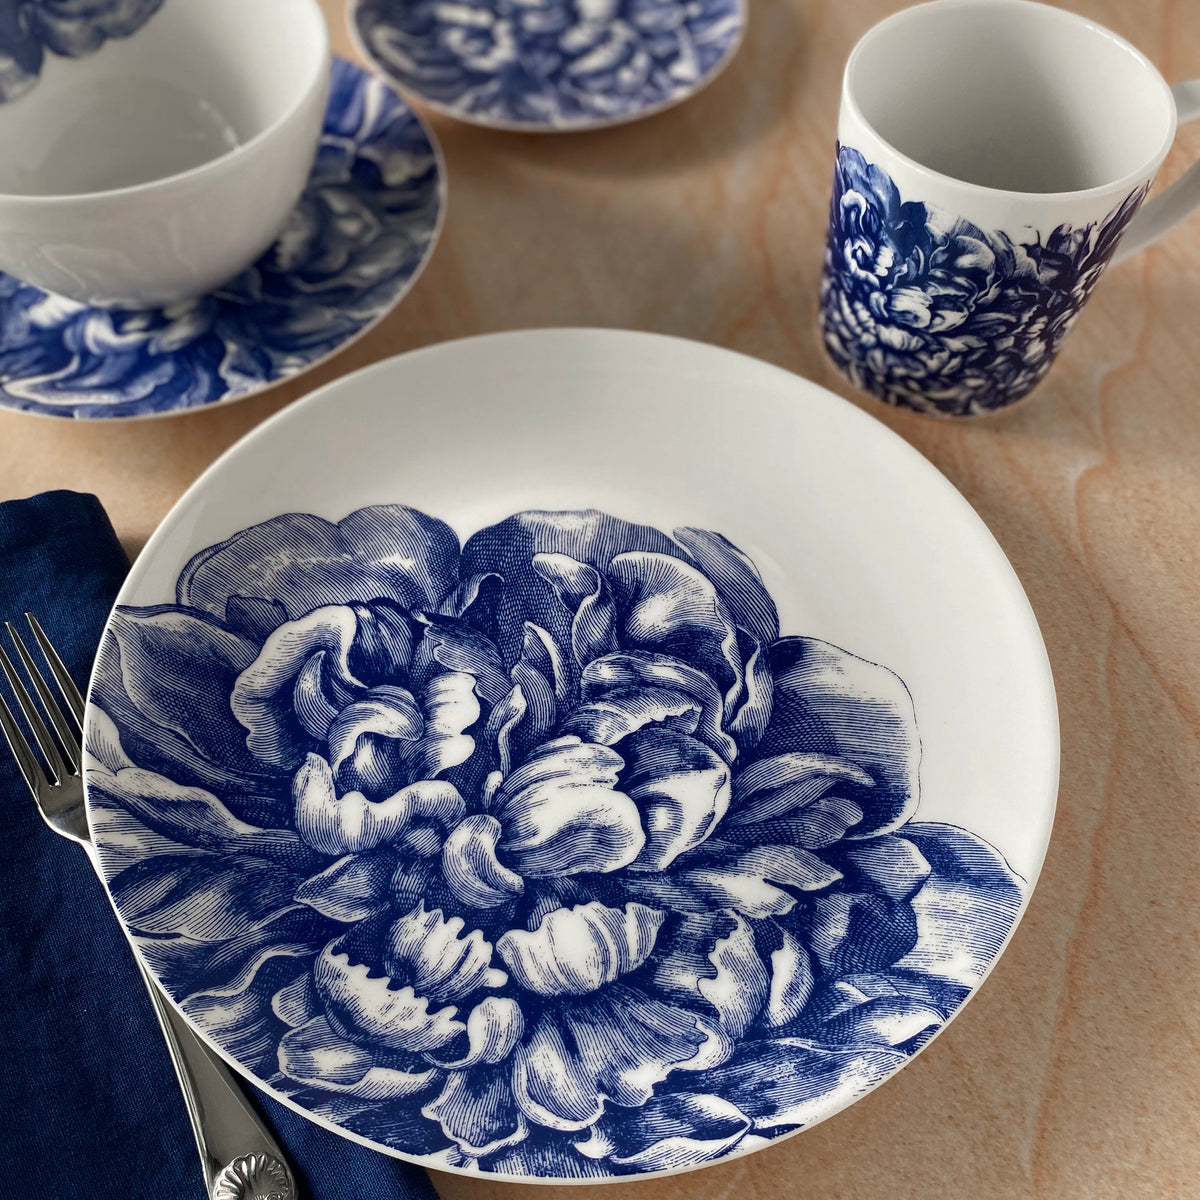 Elegant blue and white floral Caskata Artisanal Home Peony 4-Piece Place Setting including plates, bowls, and a cup, arranged on a table with a blue napkin and silverware.